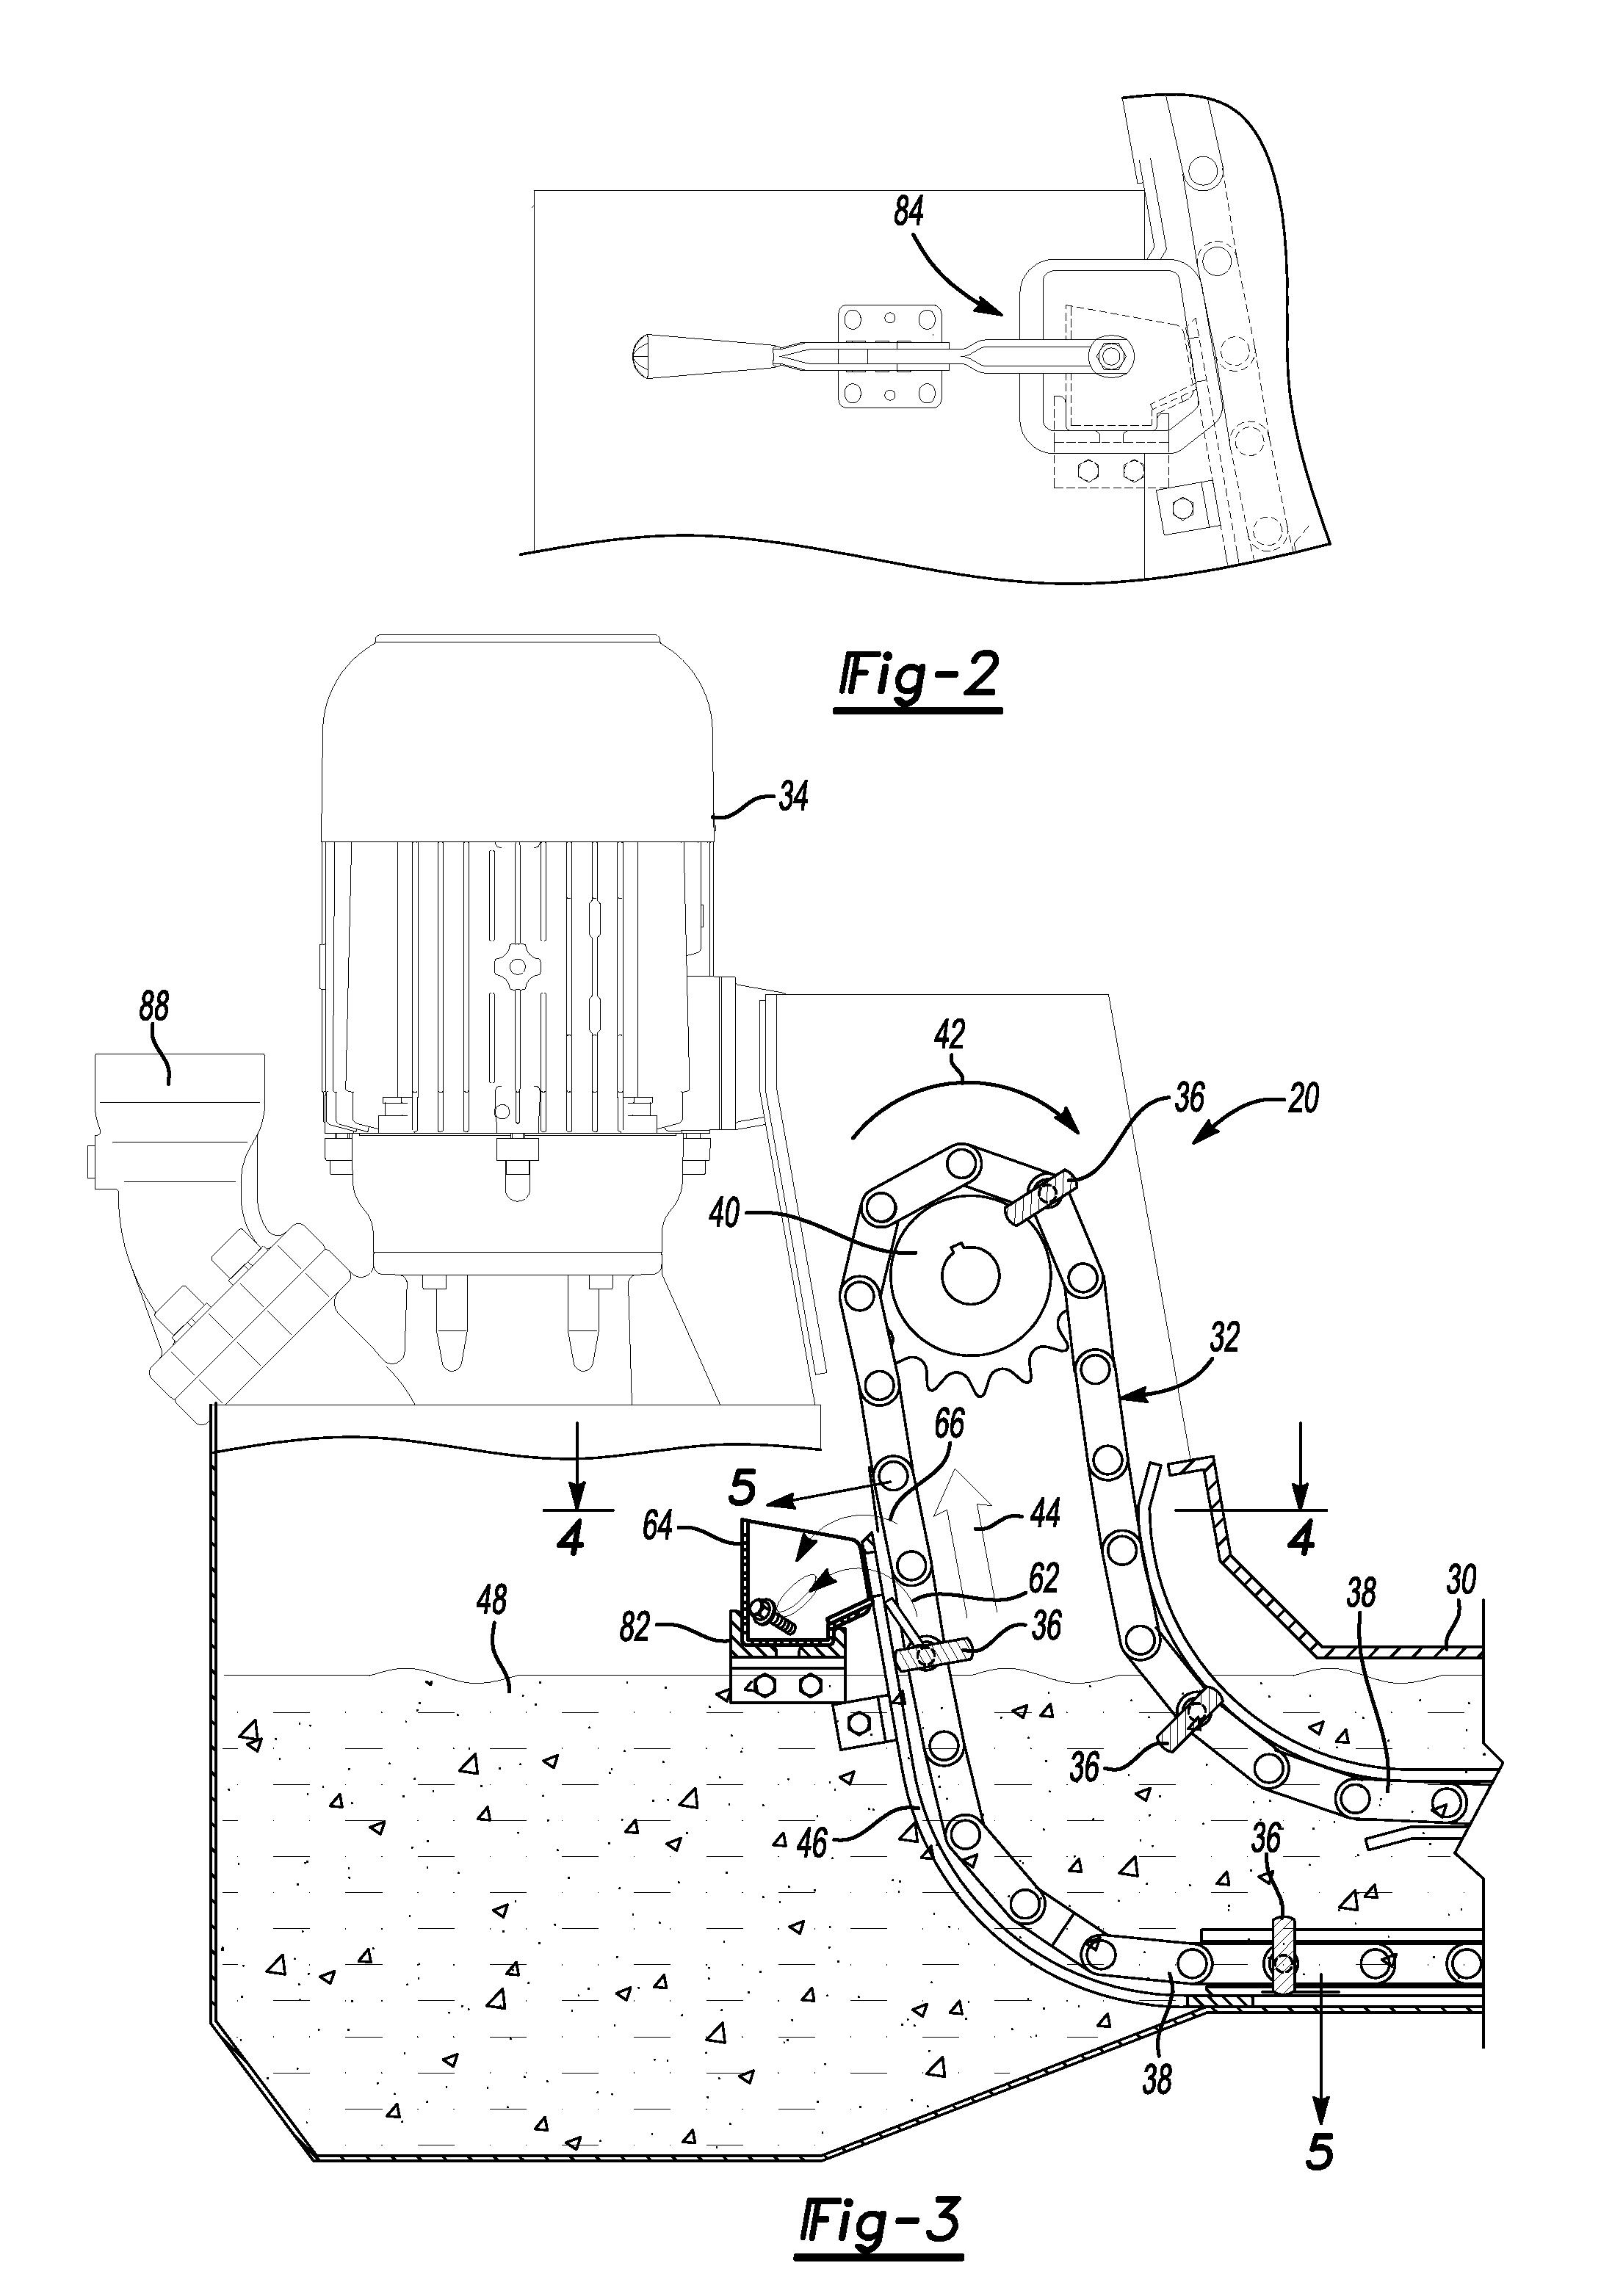 Separator separating chips and other material from coolant and method